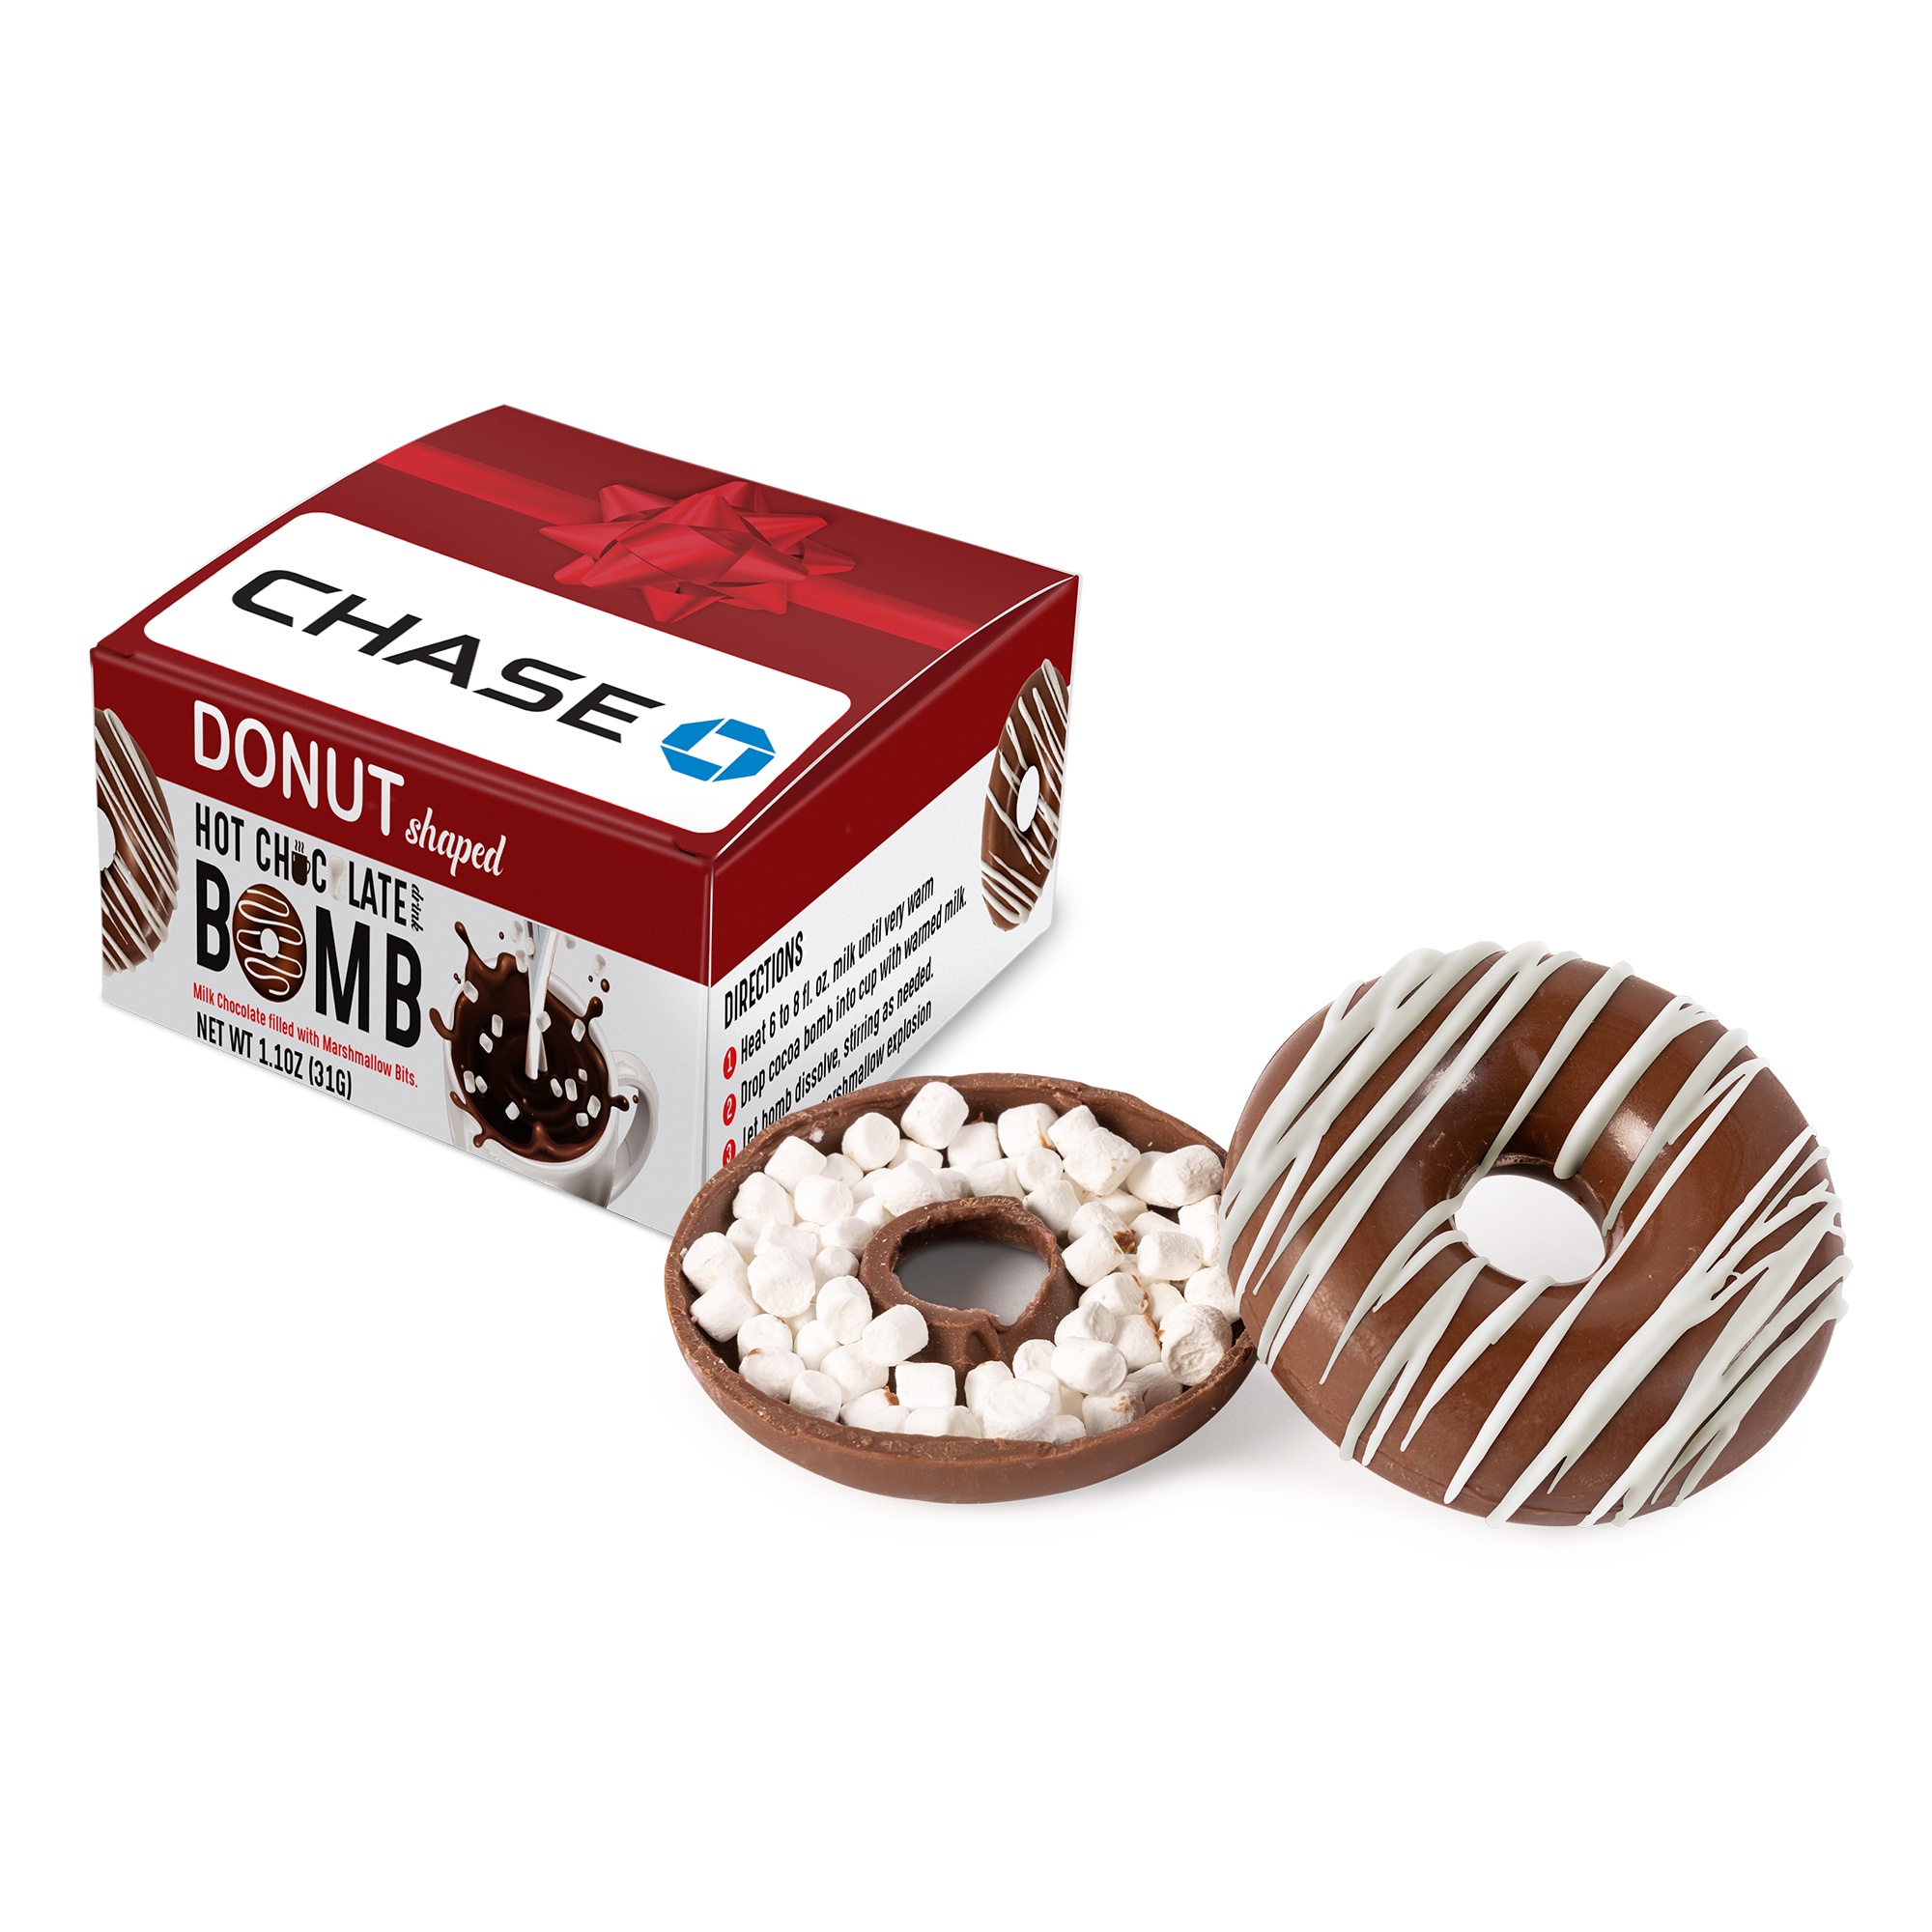 NC Custom: Donut-Shaped Hot Chocolate Bomb with Drizzle. Supplied